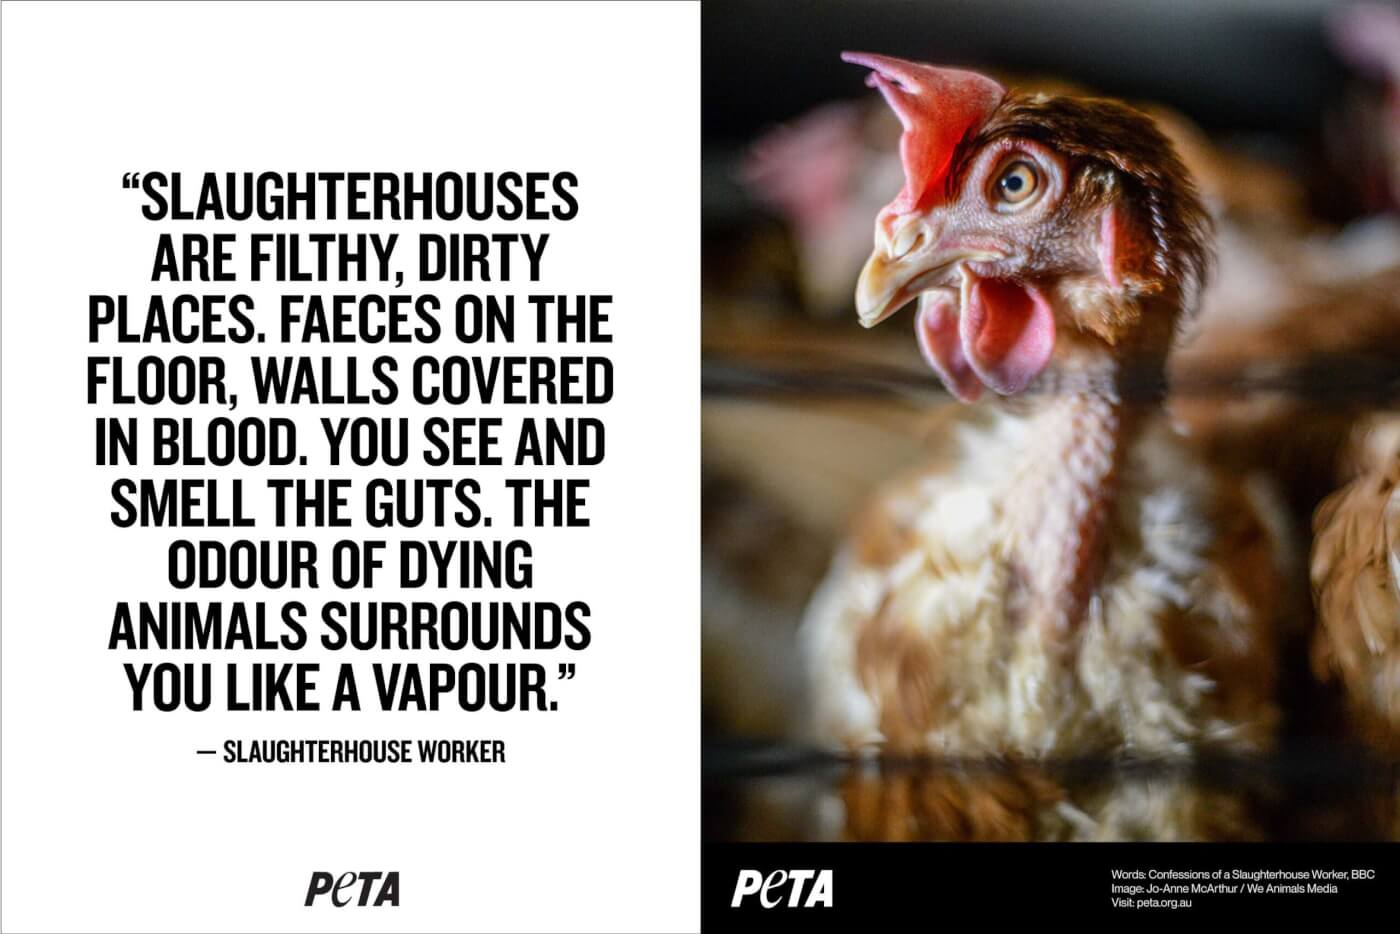 On the left is the quote: Slaughterhouses] are filthy, dirty places. There’s animal faeces on the floor, you see and smell the guts, and the walls are covered in blood.” On the right is an image of a chicken.